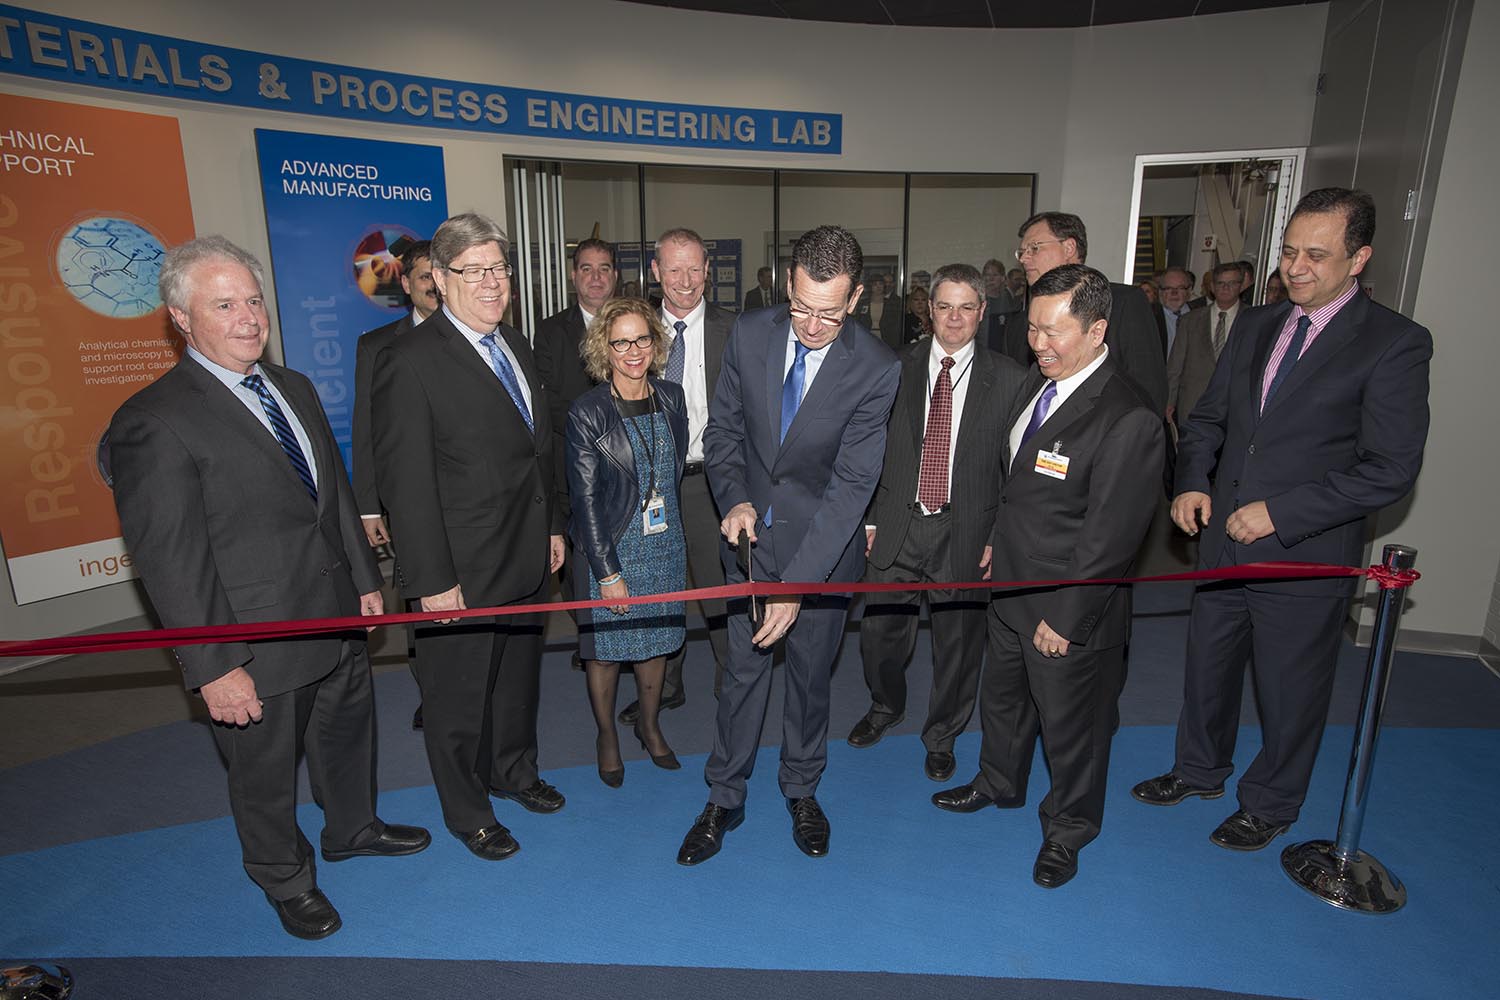 Governor Dannel P. Malloy cuts a ribbon at the new UTAS lab. Front from left to right is Dave Carter, Senior Vice President, Engineering, Operations and Quality, UTC Aerospace Systems, J. Michael McQuade, Senior Vice President of Science and Technology, United Technologies, Malloy, and UConn Provost Mun Choi, with other prominent United Technologies officials and dignitaries present.Governor Dannel P. Malloy cuts a ribbon at the new UTAS lab. Front from left to right is Dave Carter, Senior Vice President, Engineering, Operations and Quality, UTC Aerospace Systems, J. Michael McQuade, Senior Vice President of Science and Technology, United Technologies, Malloy, and UConn Provost Mun Choi, with other prominent United Technologies officials and dignitaries present.